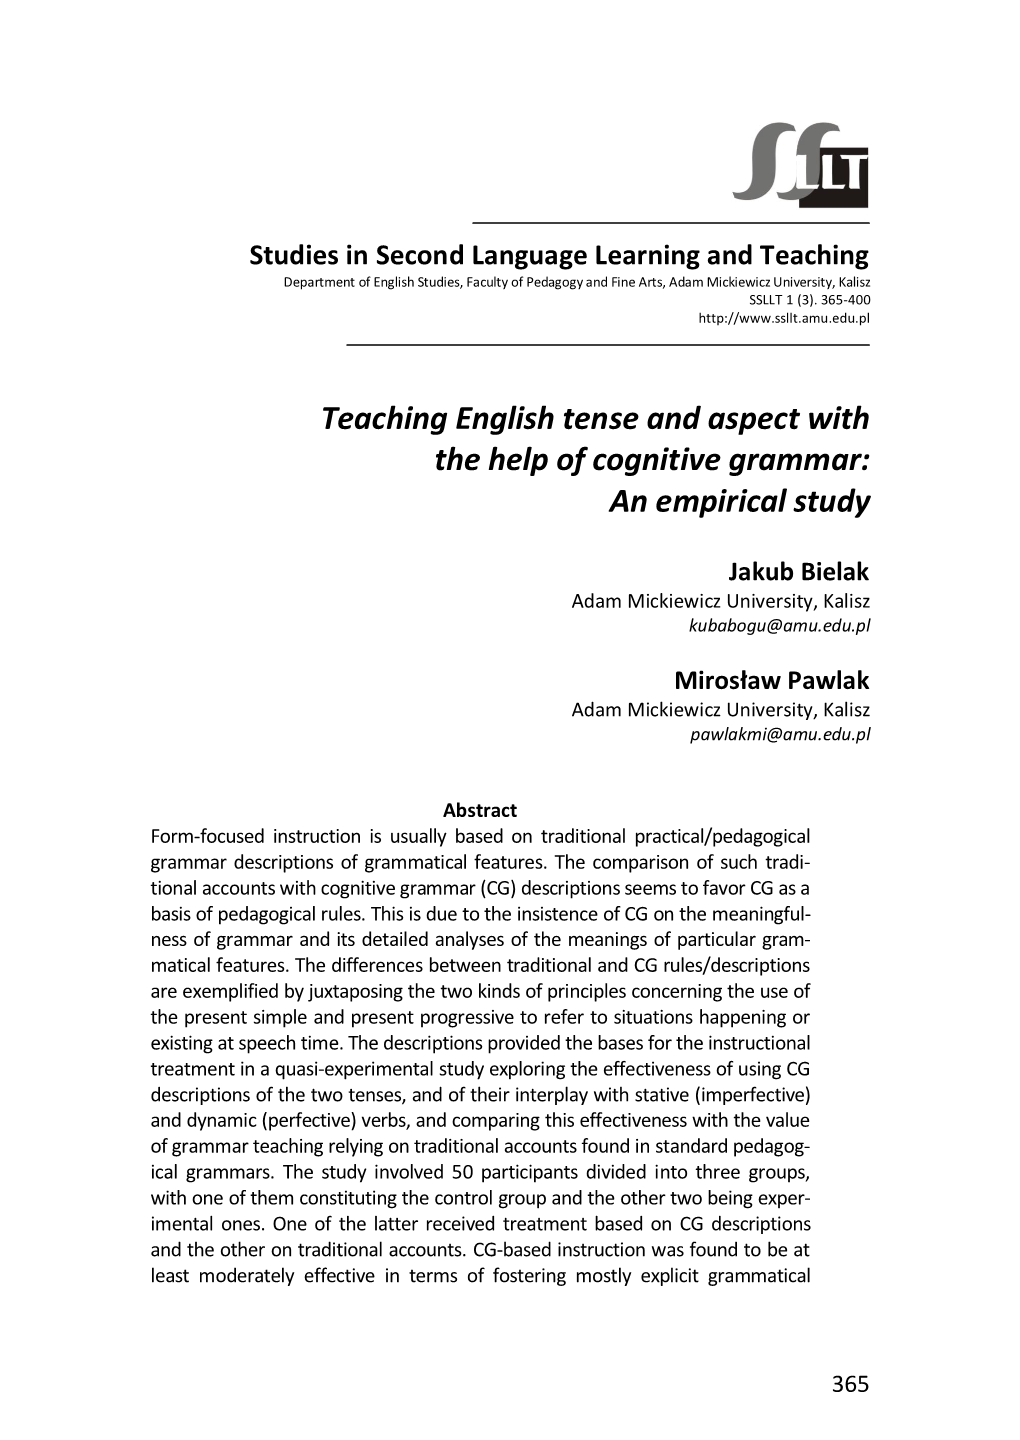 Teaching English Tense and Aspect with the Help of Cognitive Grammar: an Empirical Study